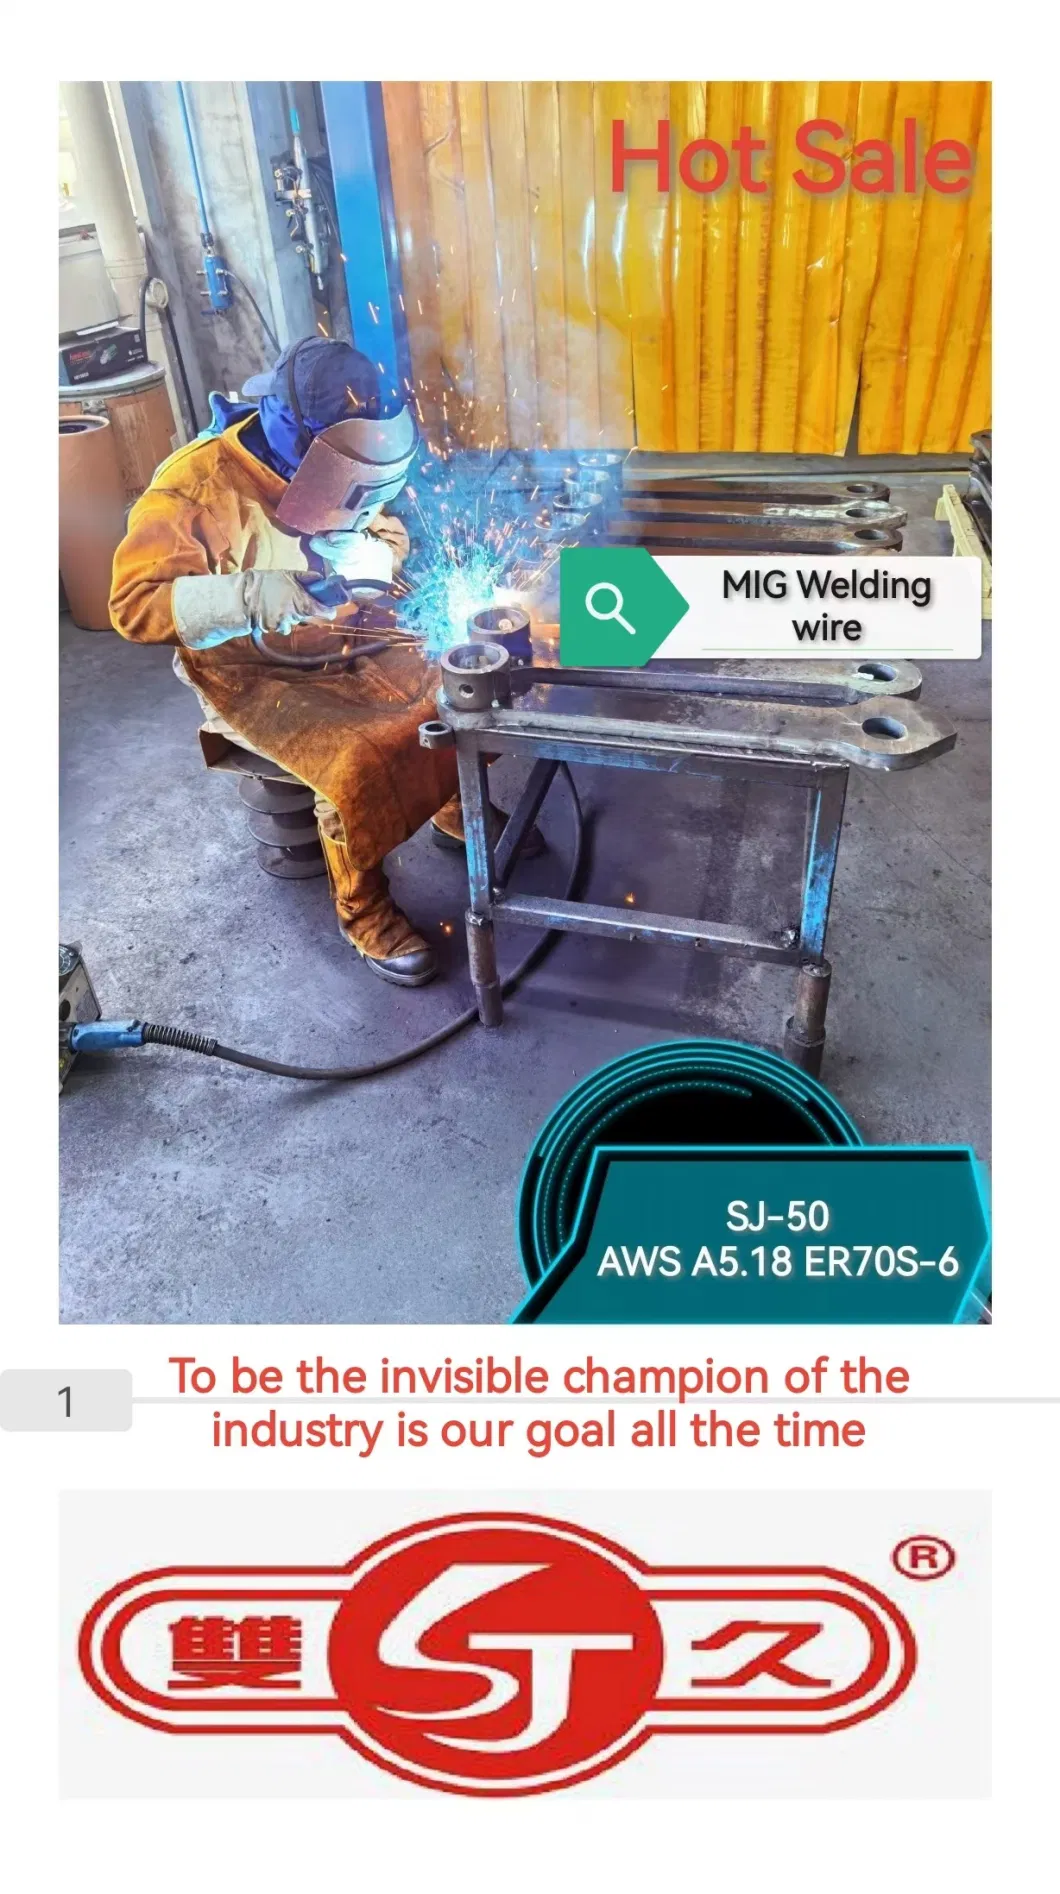 ABS Certificated Pail Pack Welding Wire Er70s-6 (SJ-50) Excellent Wire Feeding Performance